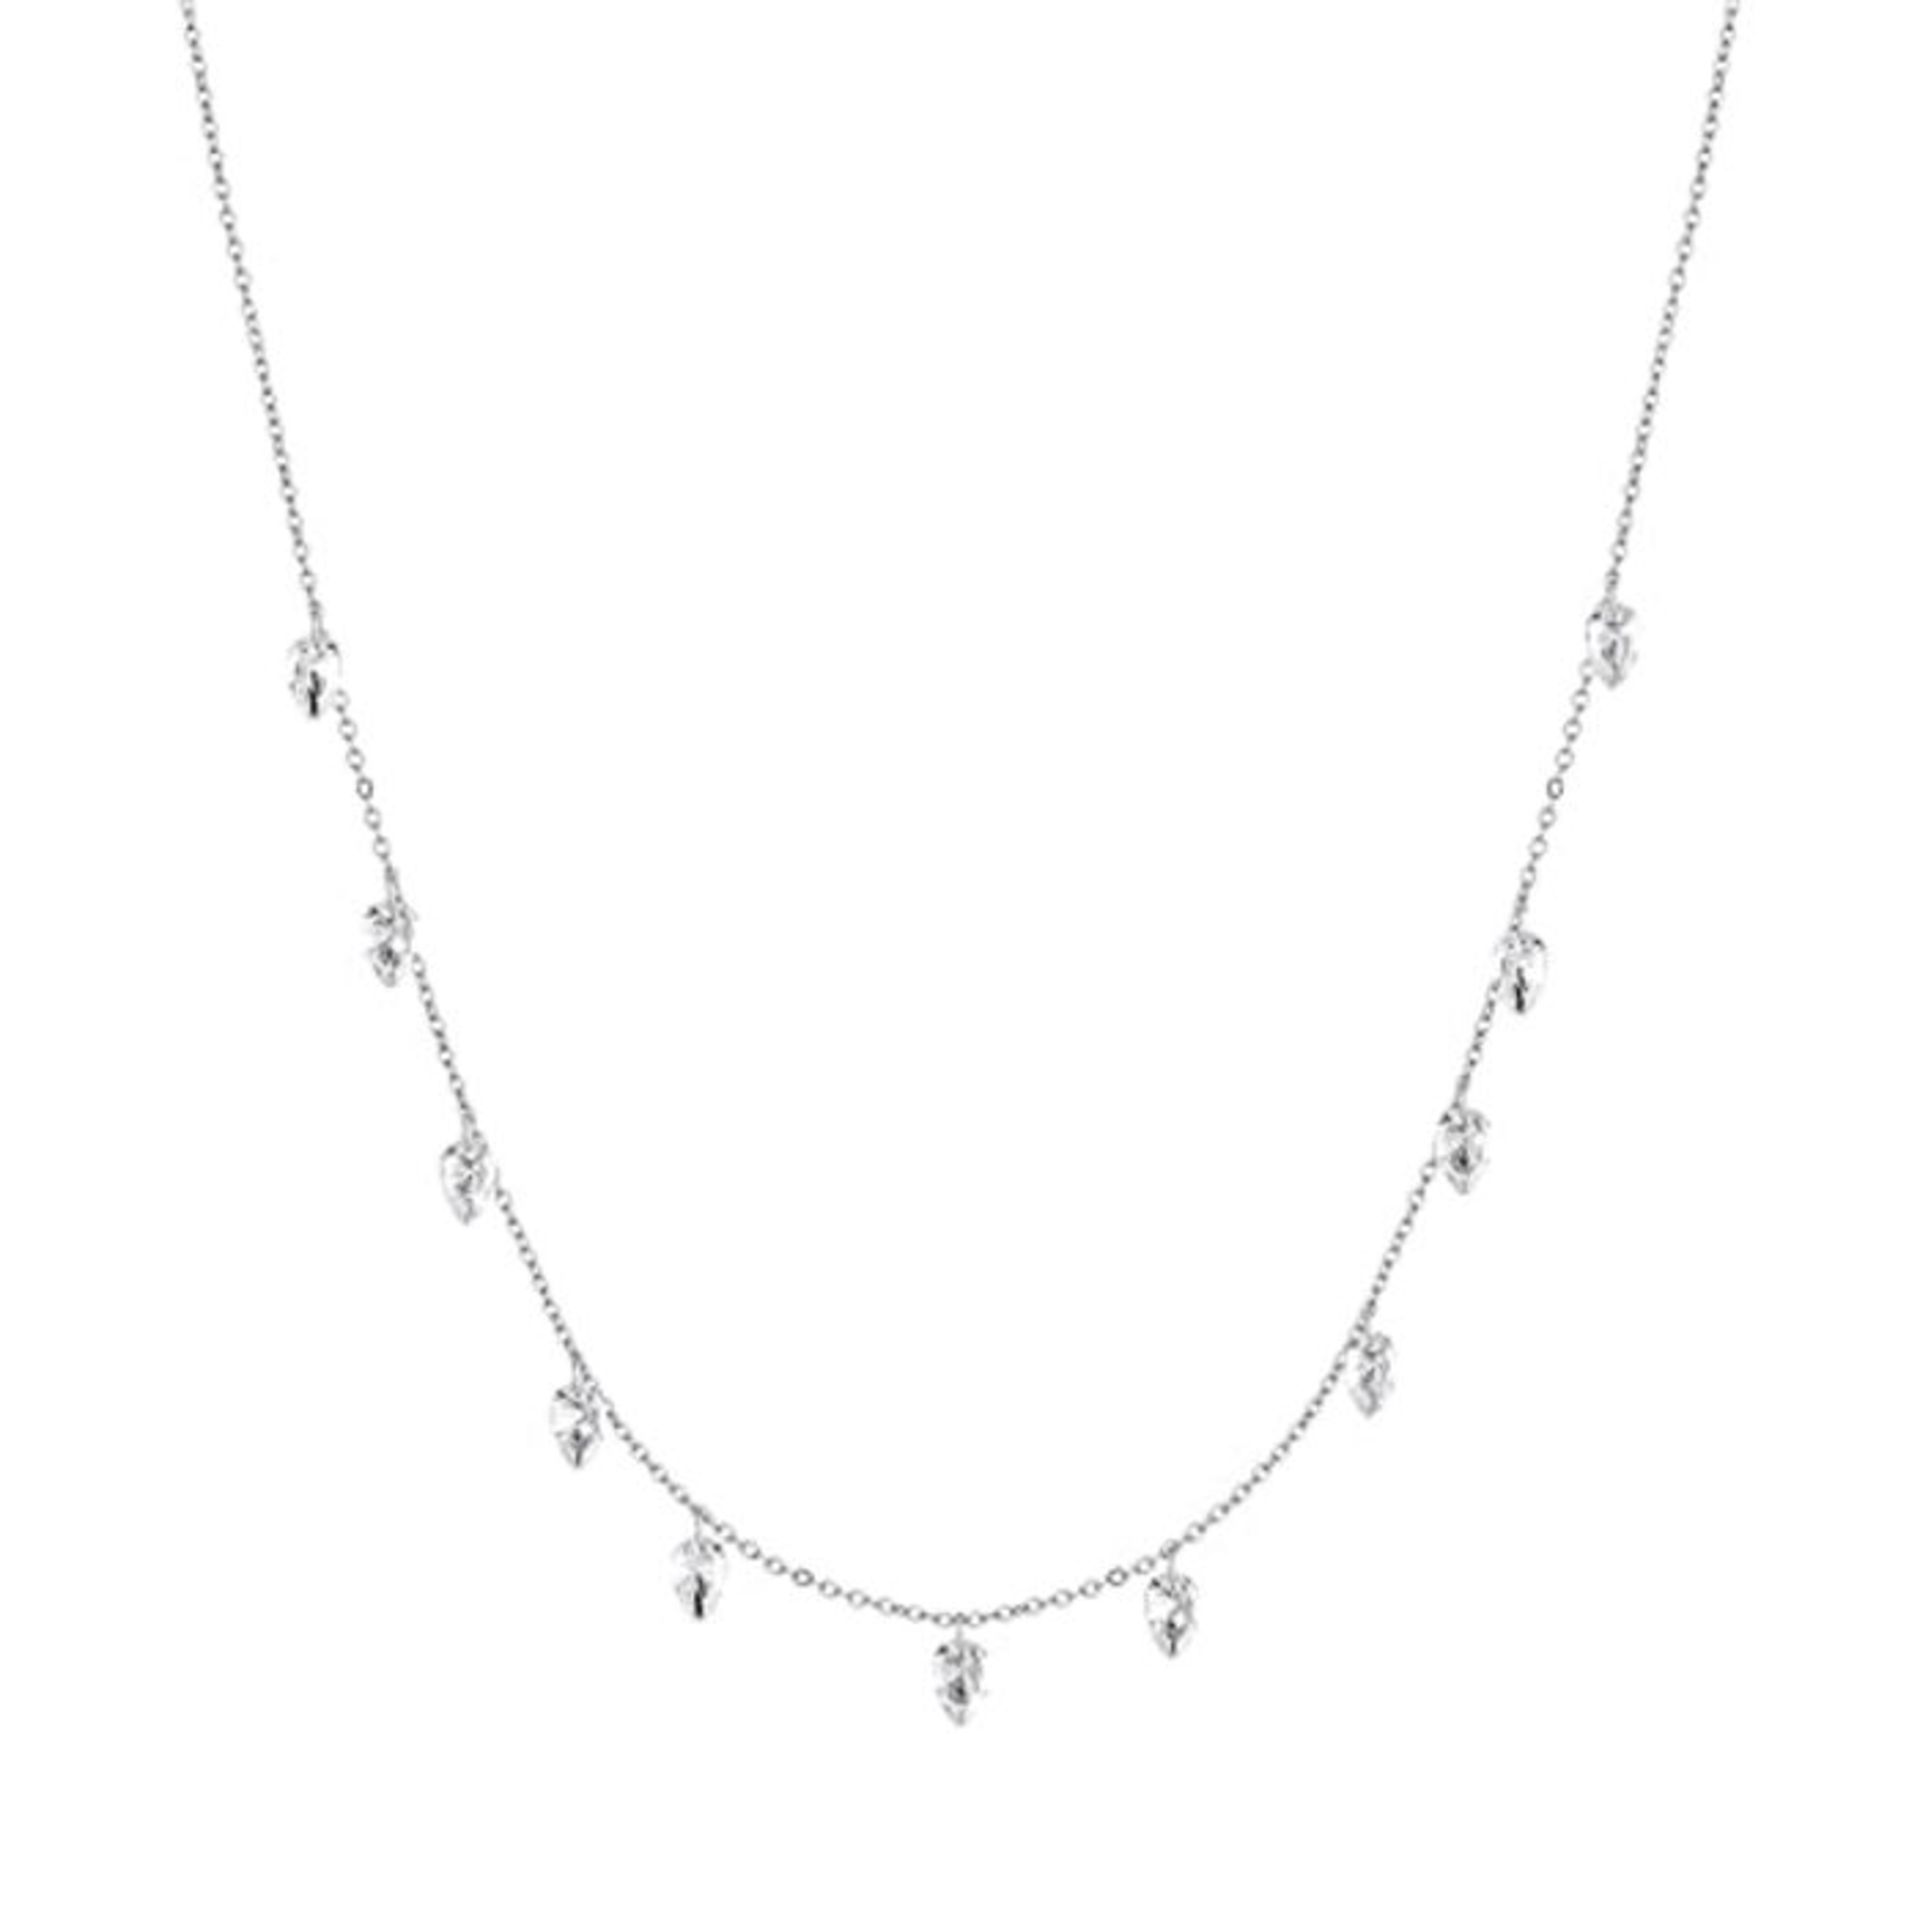 Tamaris , Women?s Stainless Steel Not a gem Chain Necklace, Silver, 45 cm - TJ-0074-N-